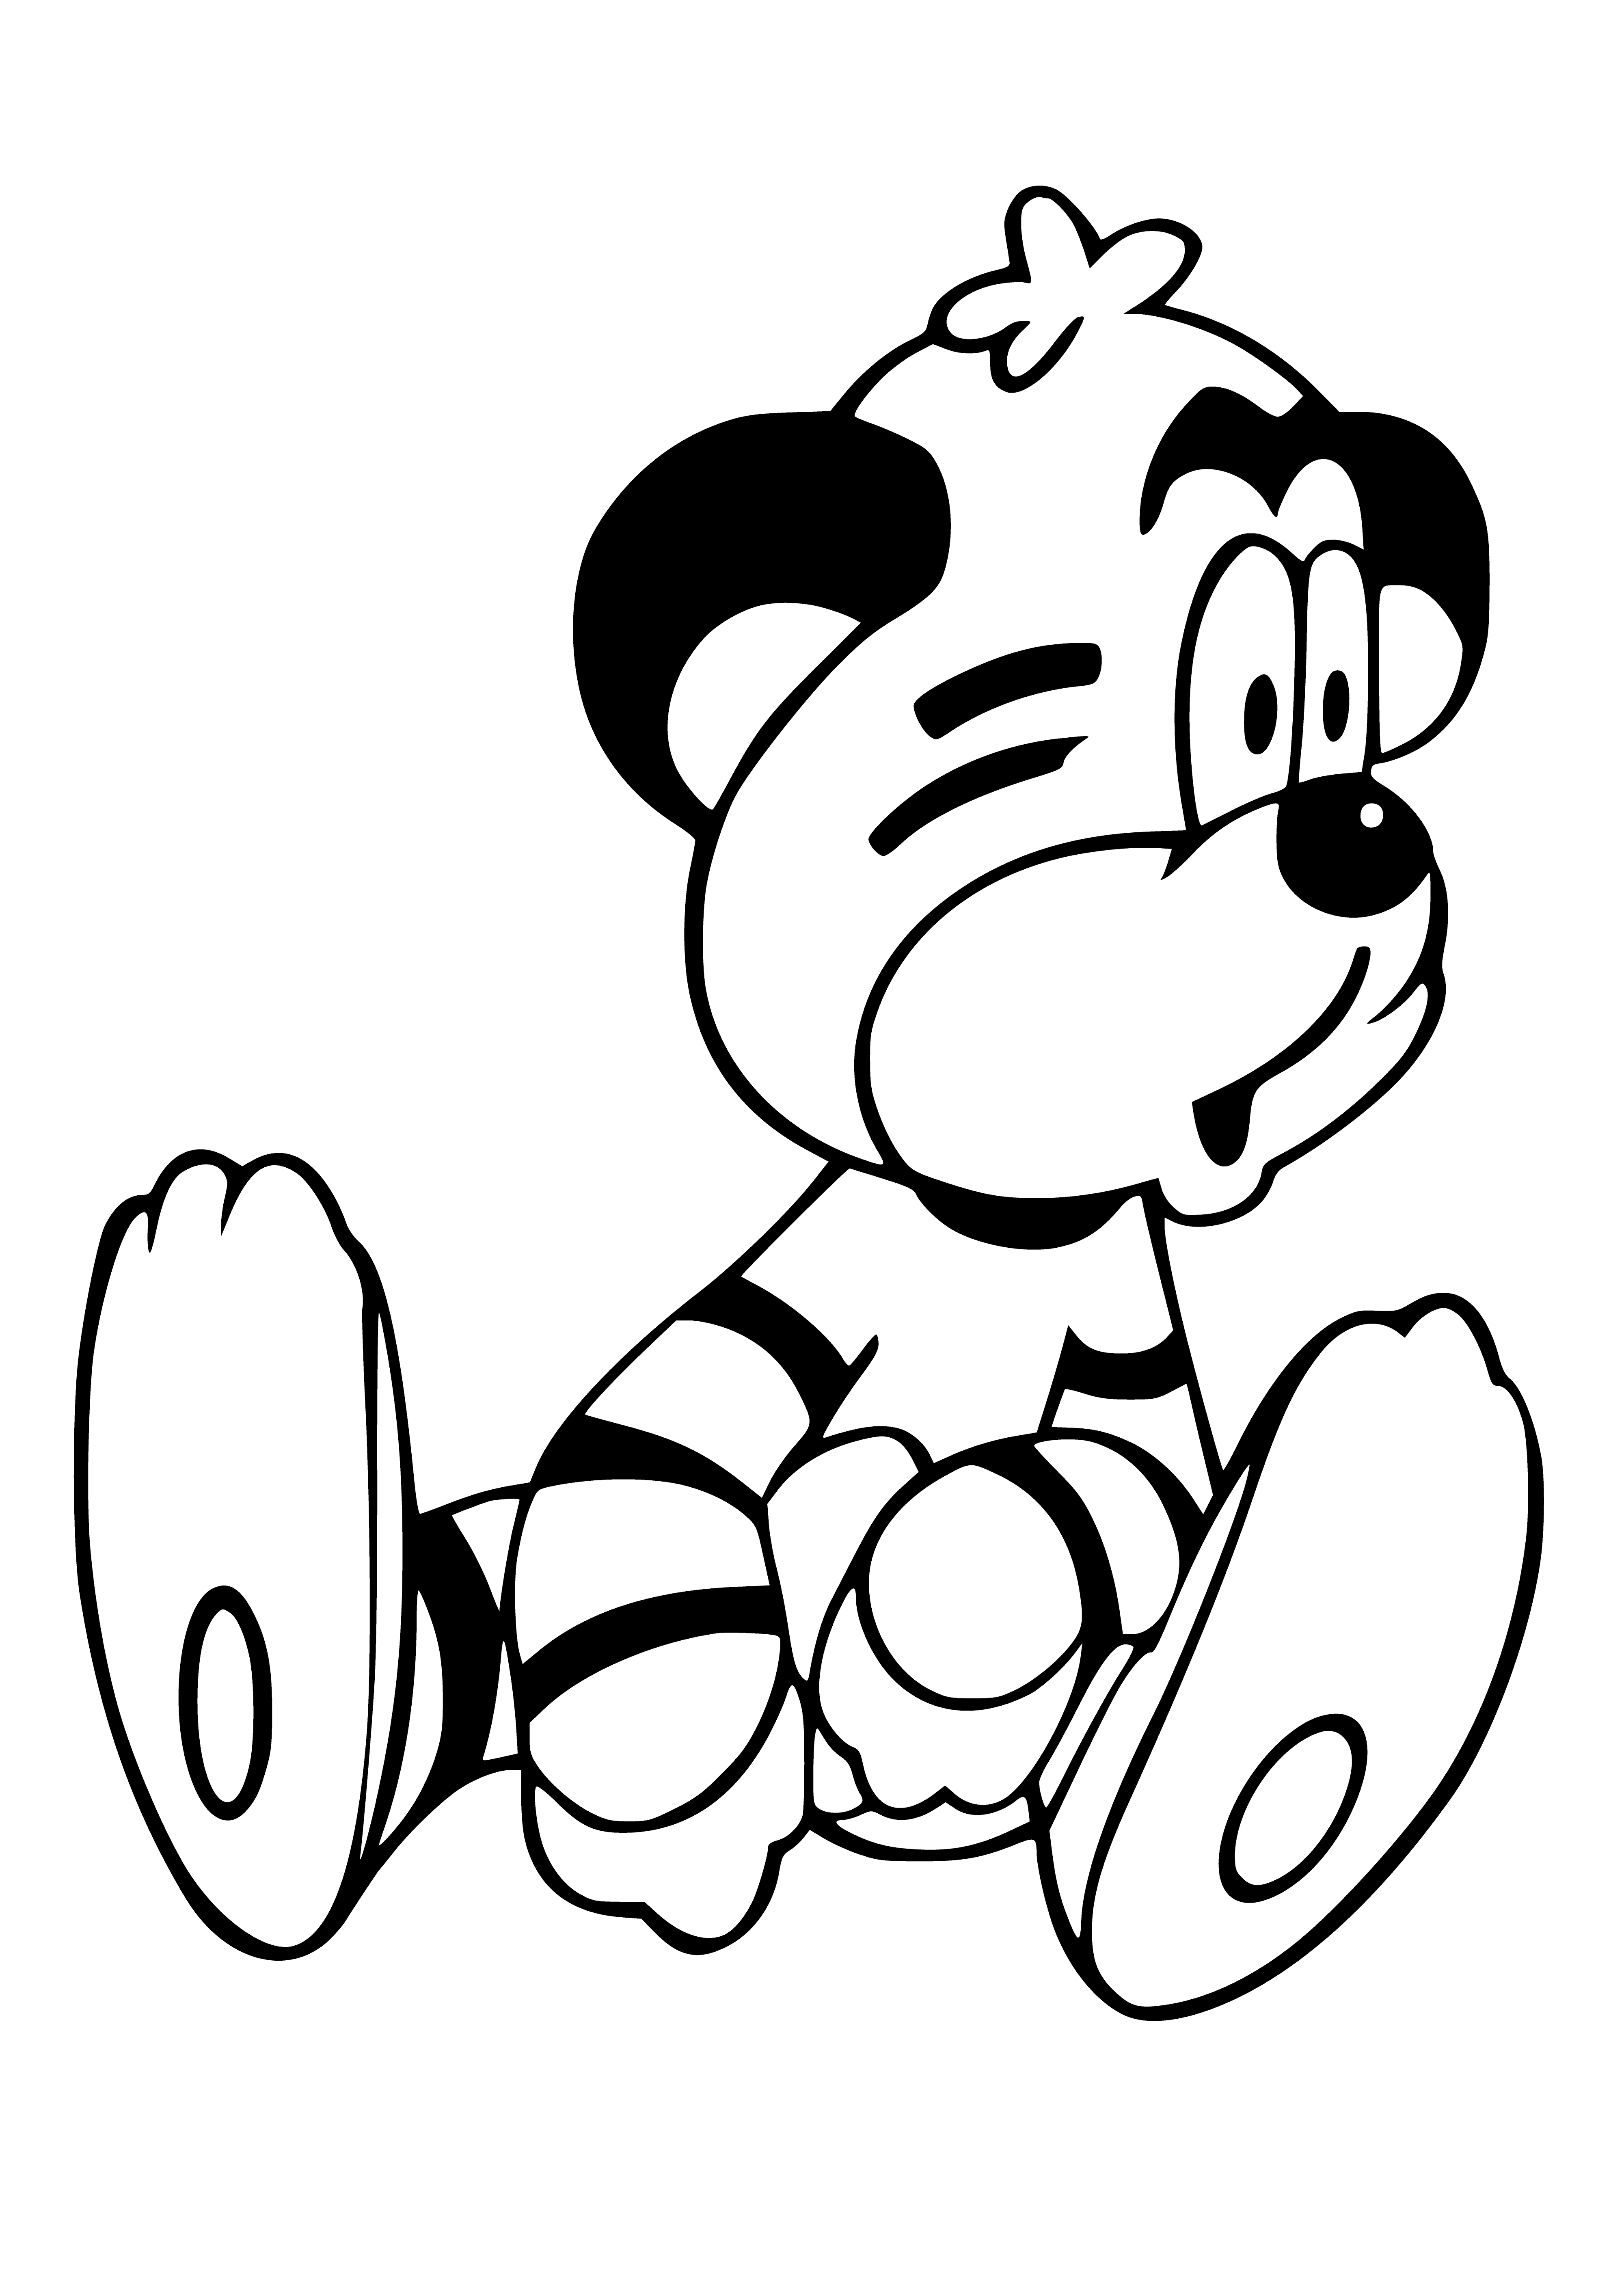 coloring page: A fluffy clouded sky, an orange & black striped tiger cub with white belly and pointy ears–short legs and long tail.